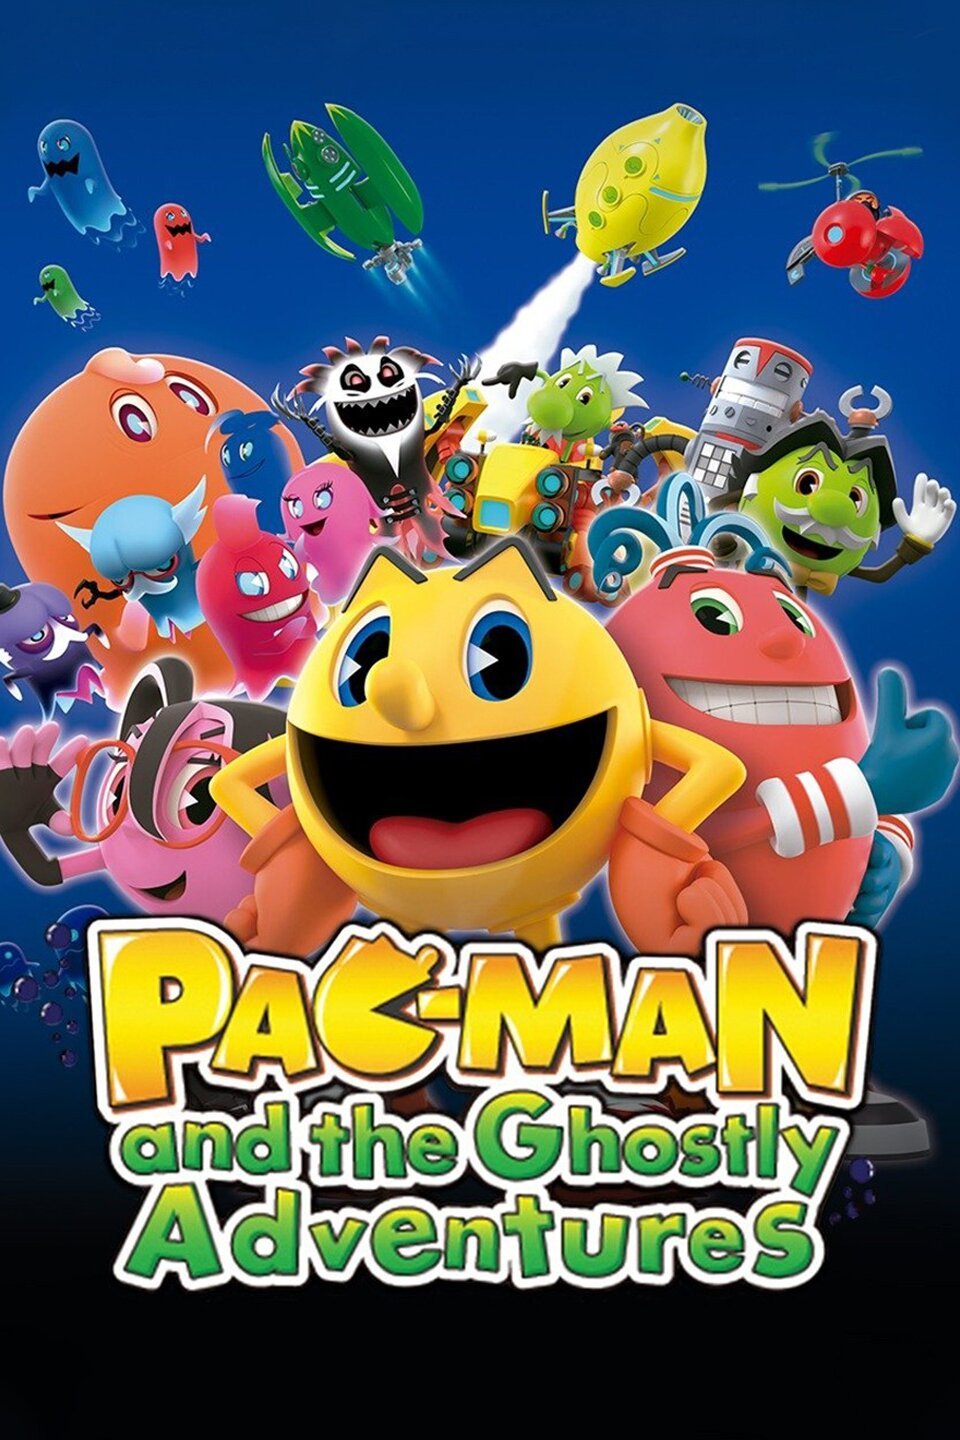 Pac man and the ghostly adventures cast